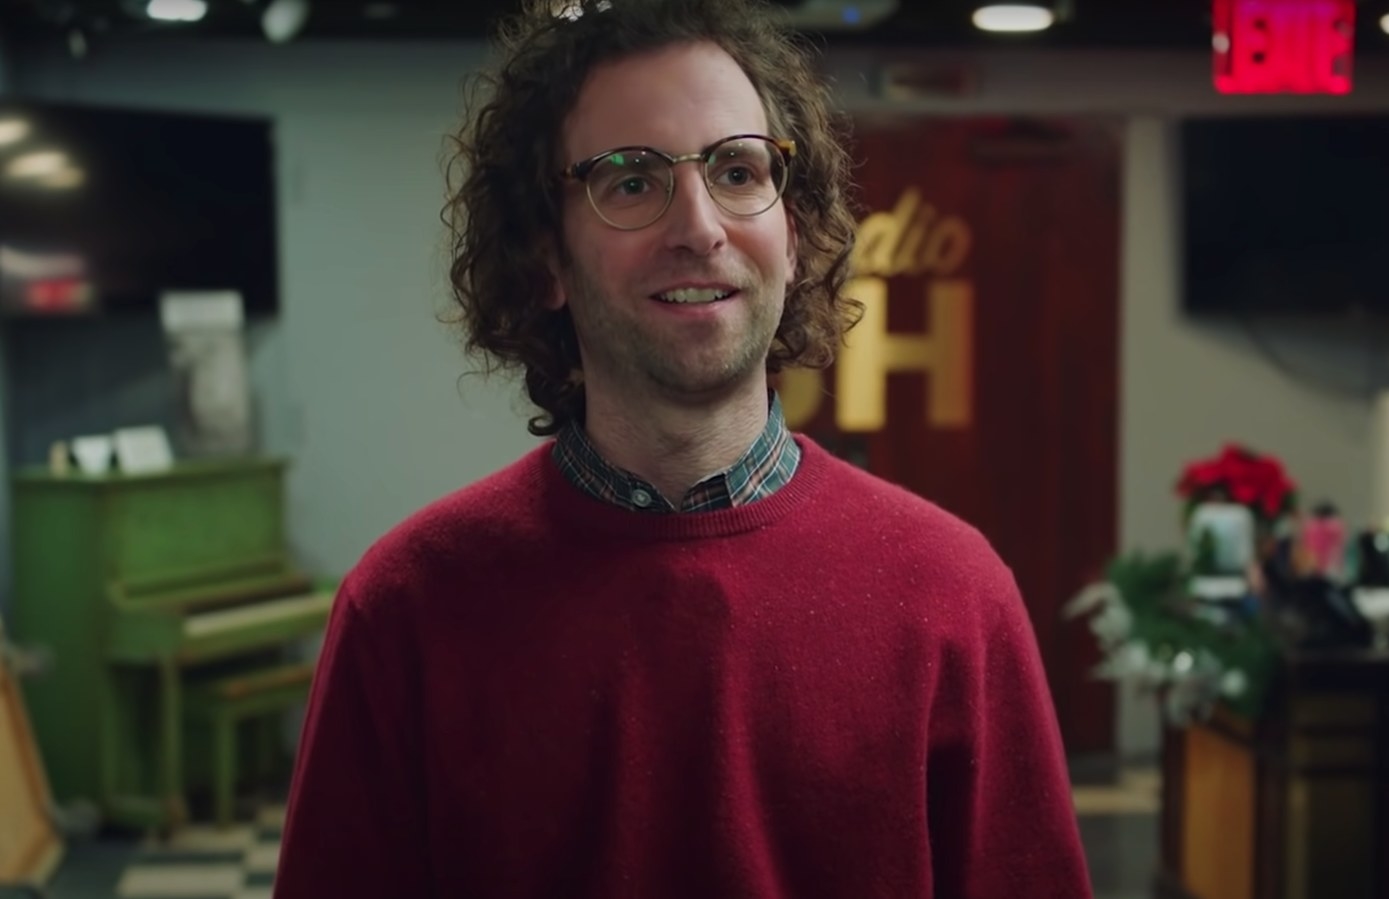 Kyle Mooney standing in a hallway at the SNL studio, remembering the good times